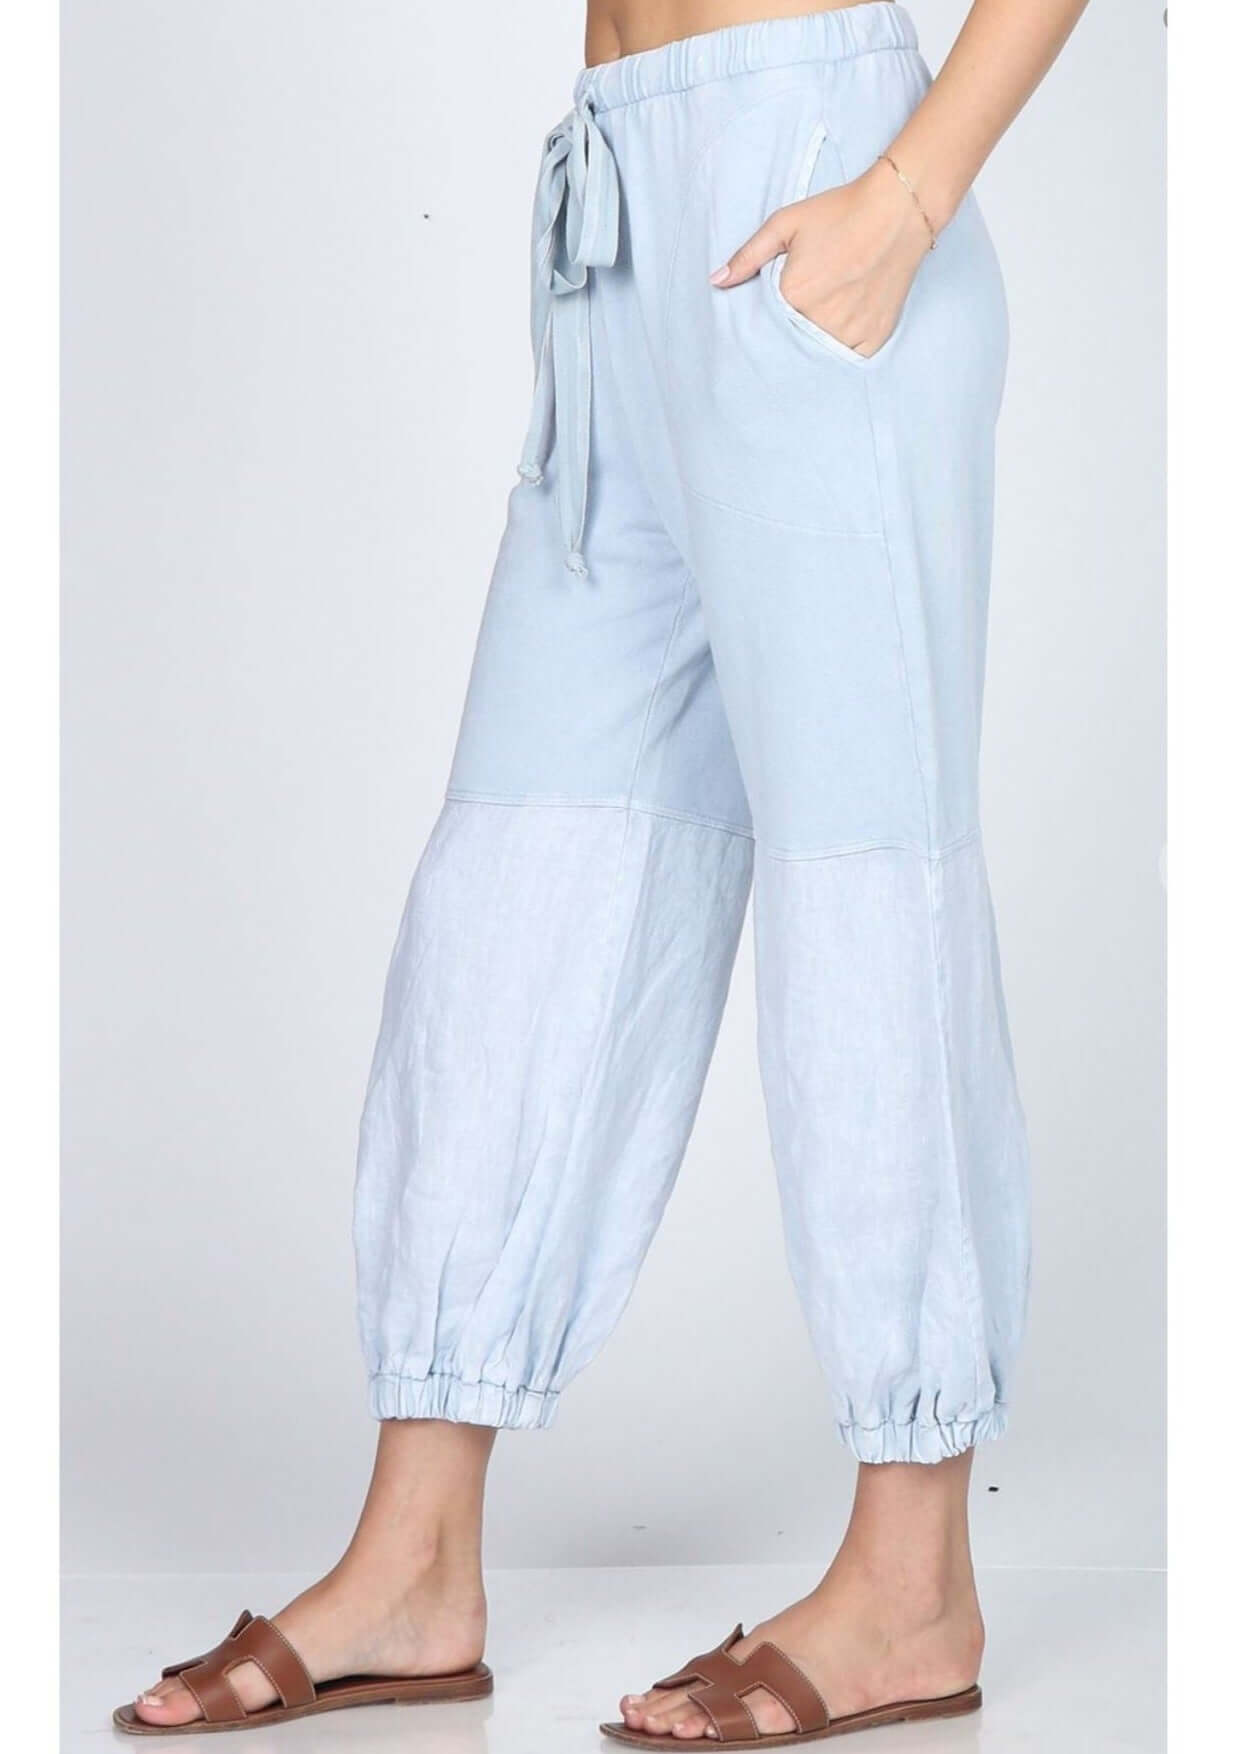 Baby Blue M. Rena Style# S4979 Linen Mineral Washed Luxury Joggers Made with the finest quality fabrics, dyed and handled in small-batch production | Made in USA